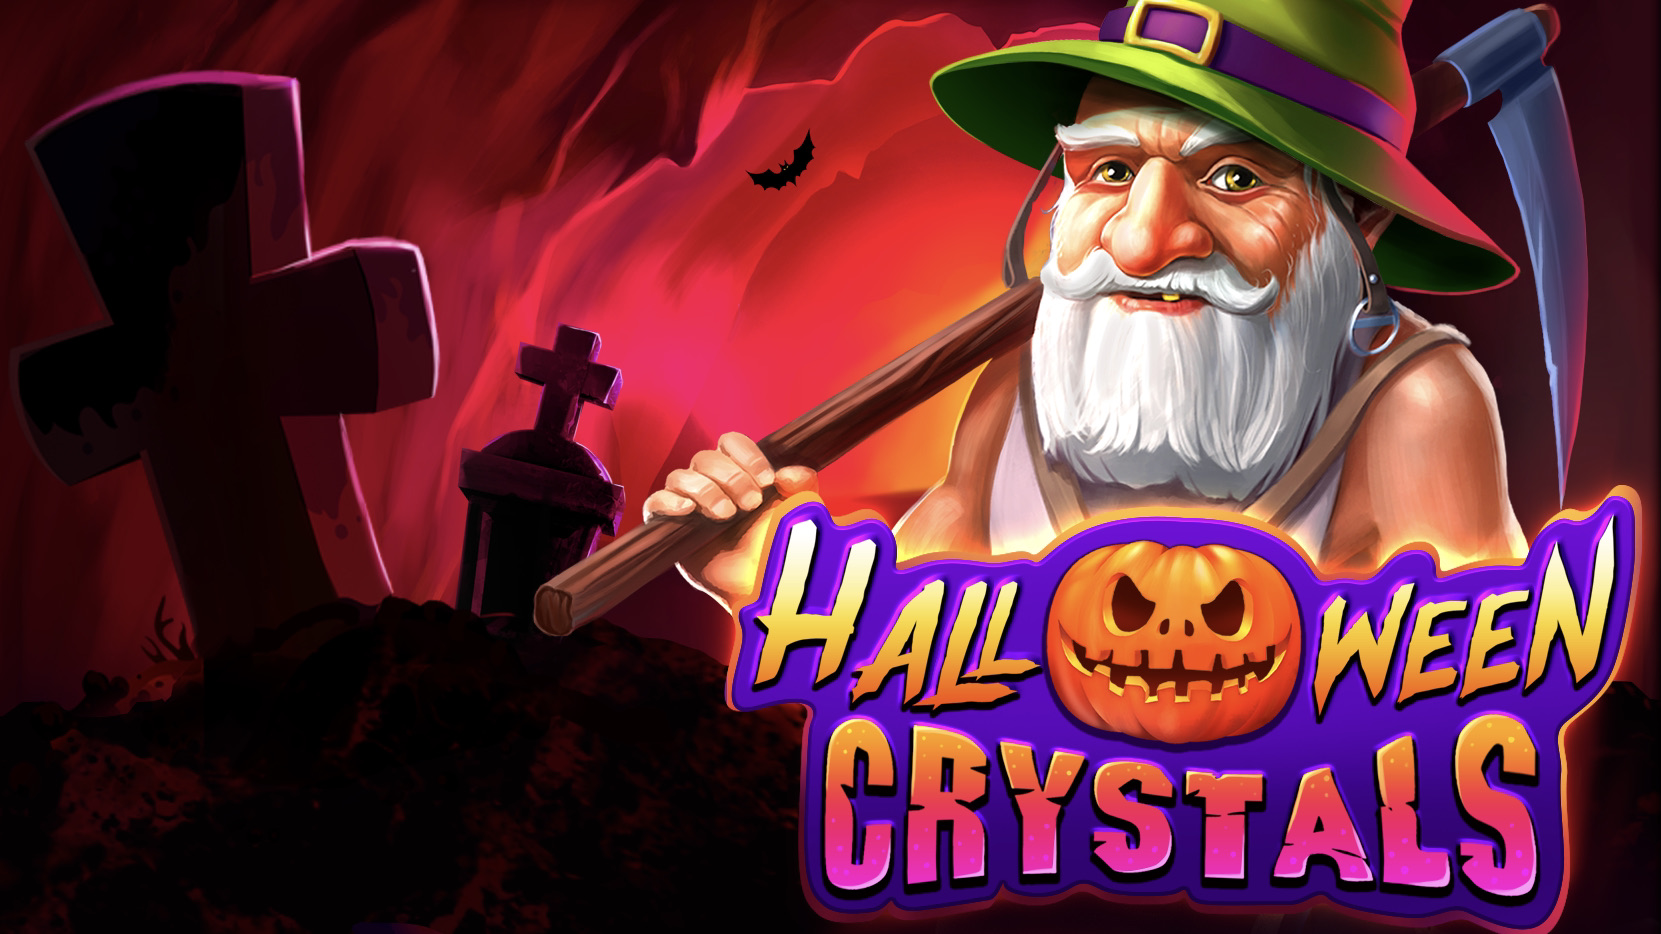 Halloween Crystals is a 5x3, five-payline slot with features including a 